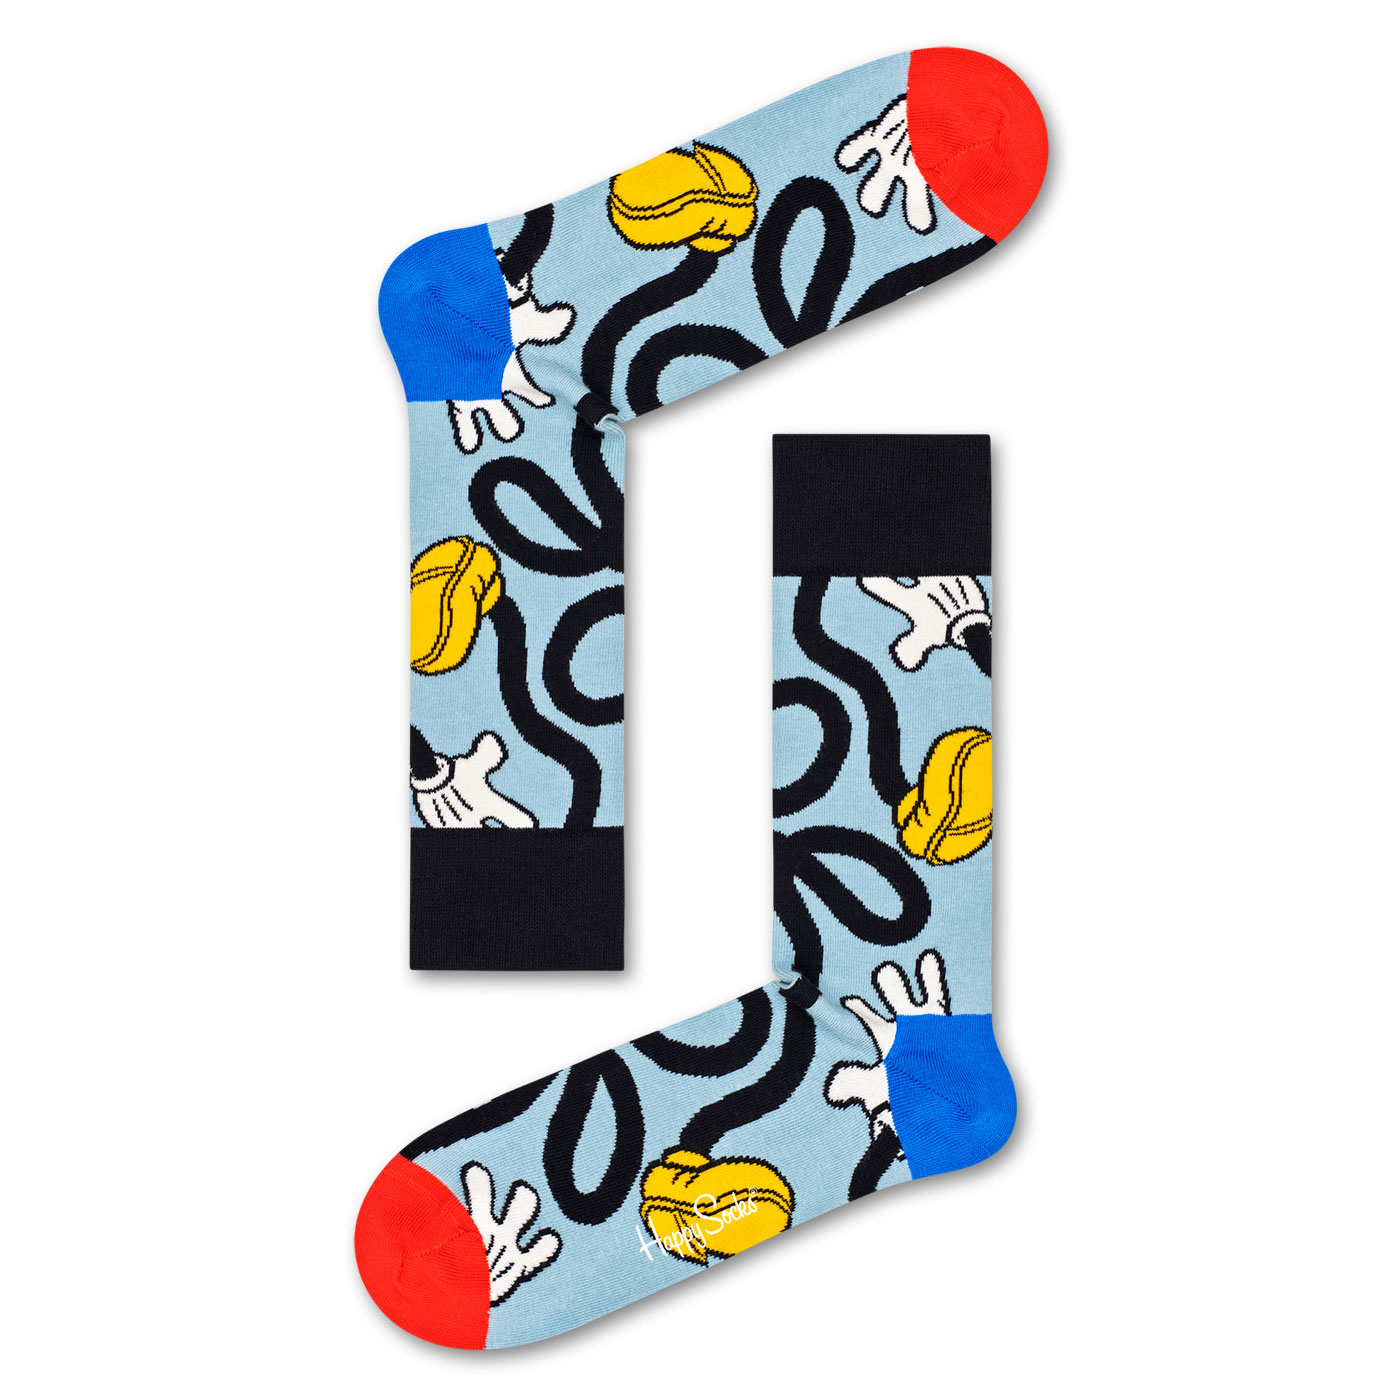 Disney Mickey Stretch Sock(41-46) <img src="/banner_images/banner_0000000180.gif">